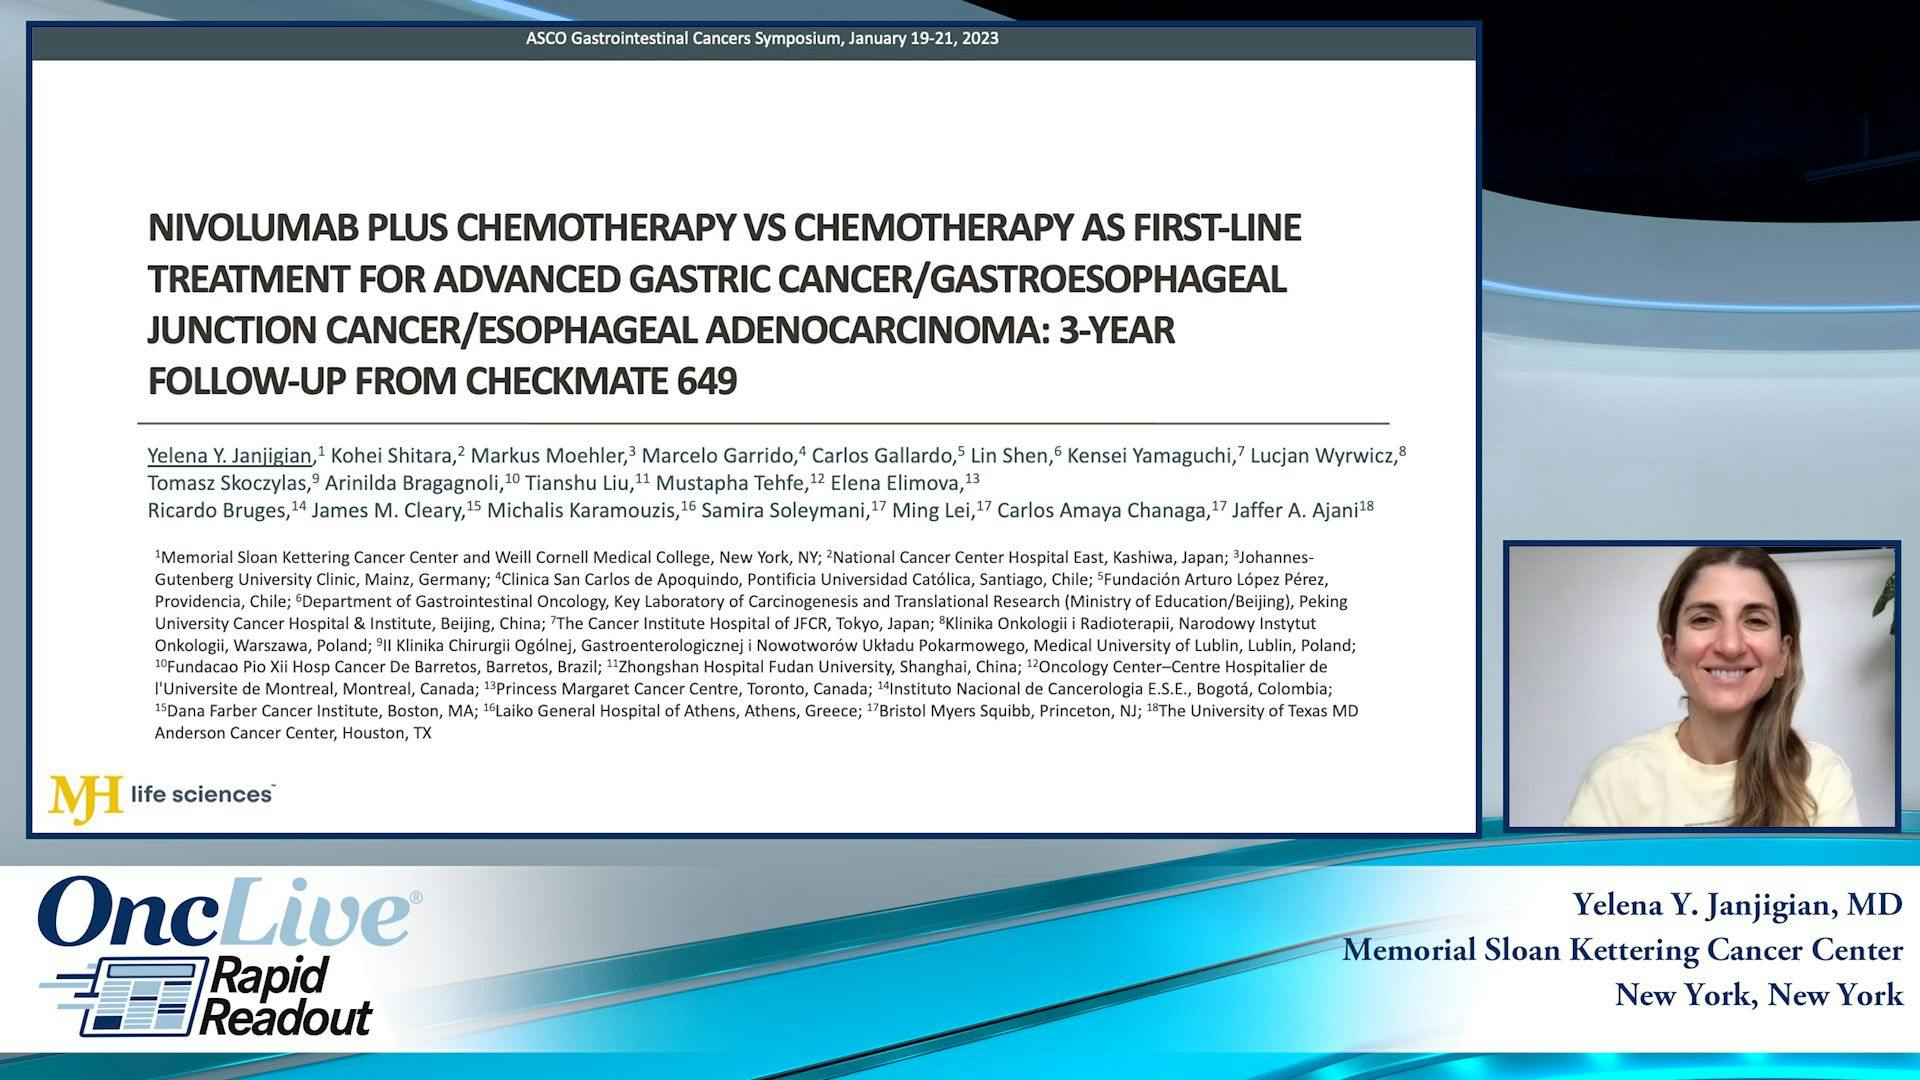 Nivolumab plus chemotherapy vs chemotherapy as first-line treatment for advanced gastric cancer/gastroesophageal junction cancer/esophageal adenocarcinoma: 3-year follow-up from CheckMate 649